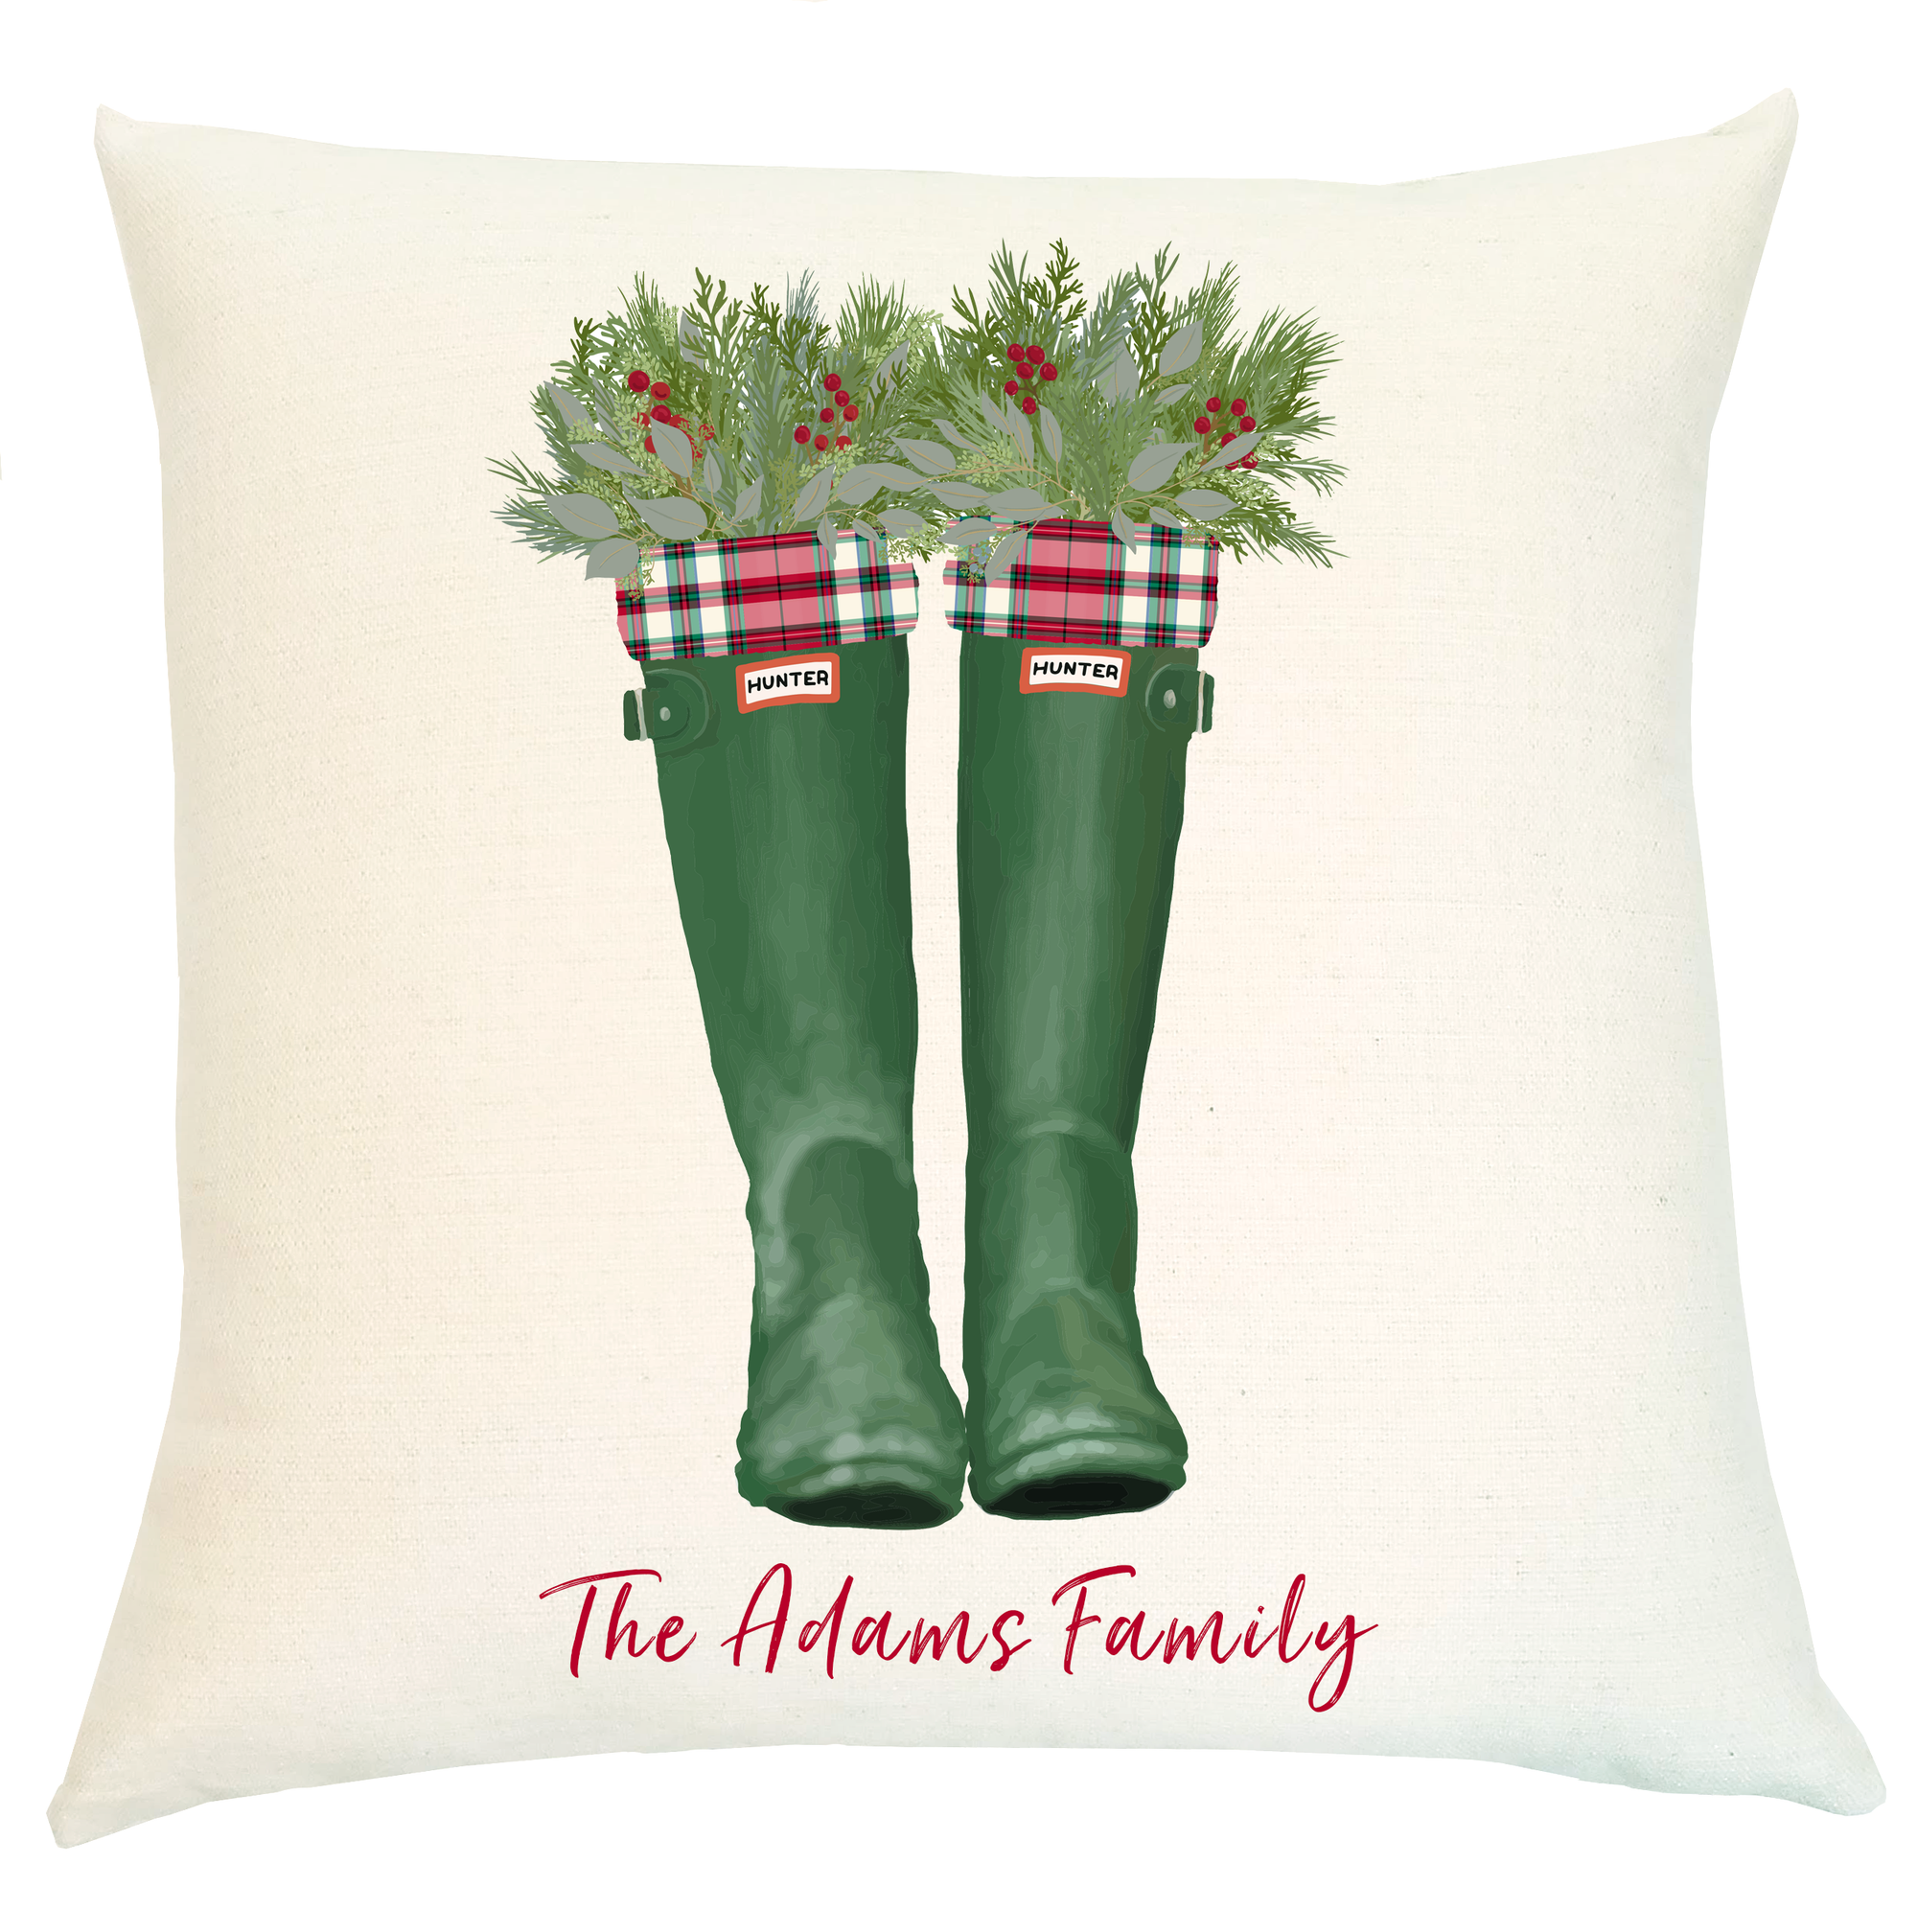 Pillow Personalized - Green Boots